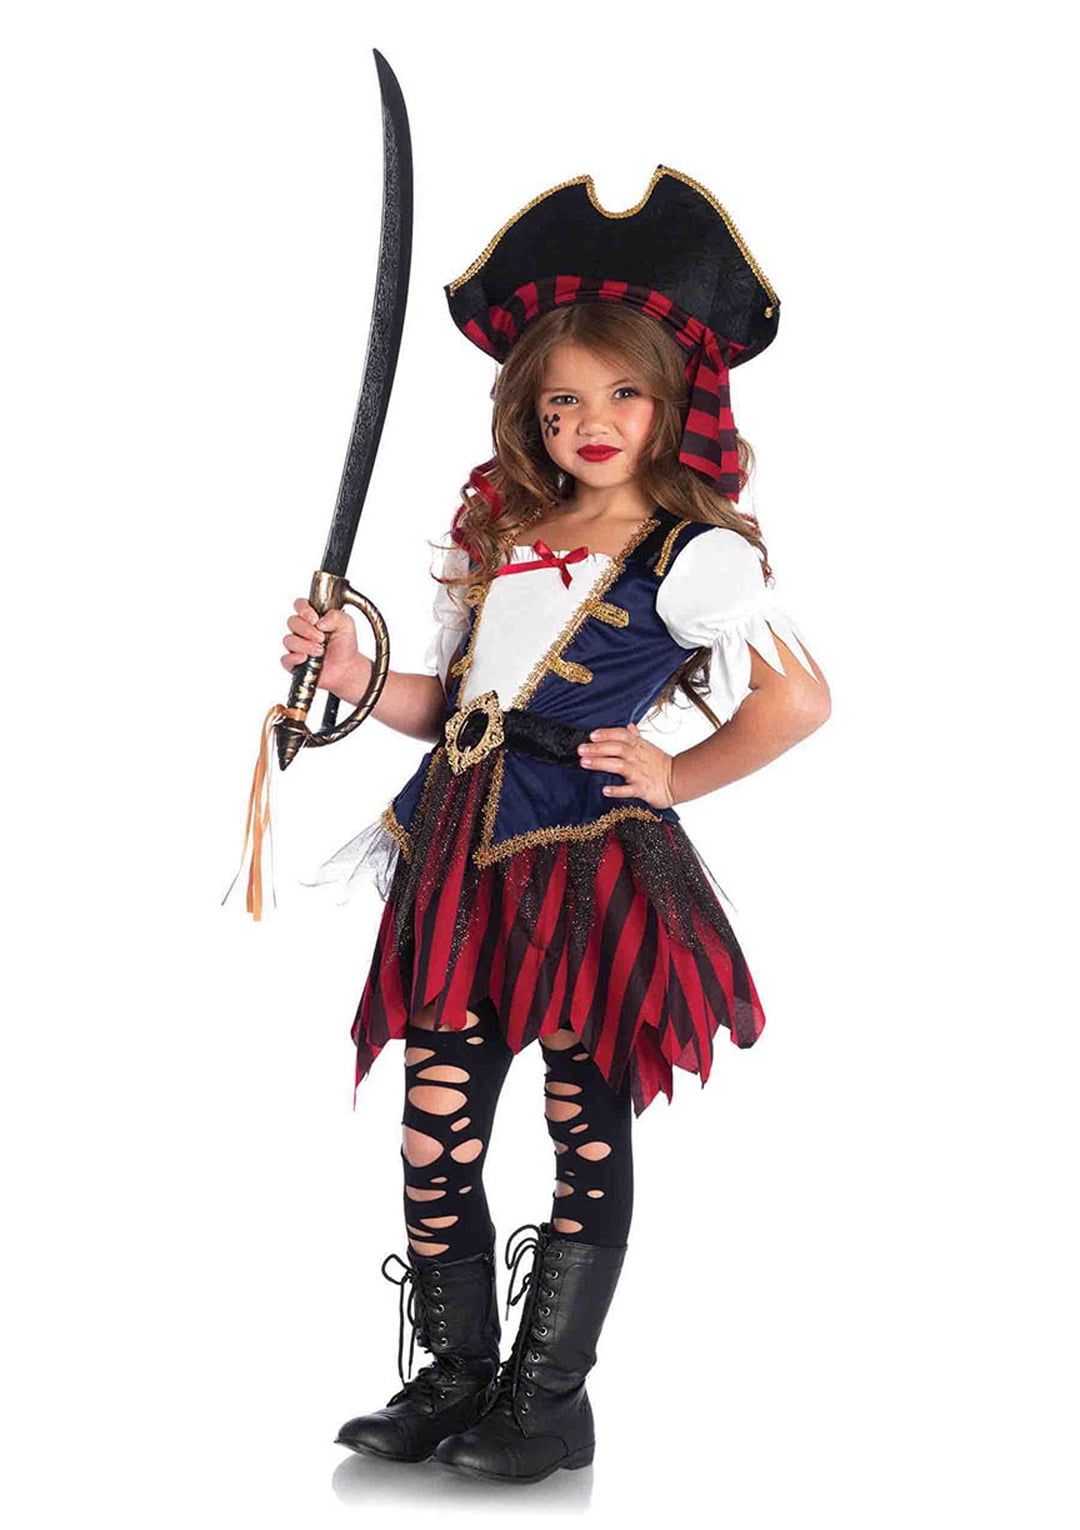 Spooky Pirate Party Decorations - Michelle's Party Plan-It